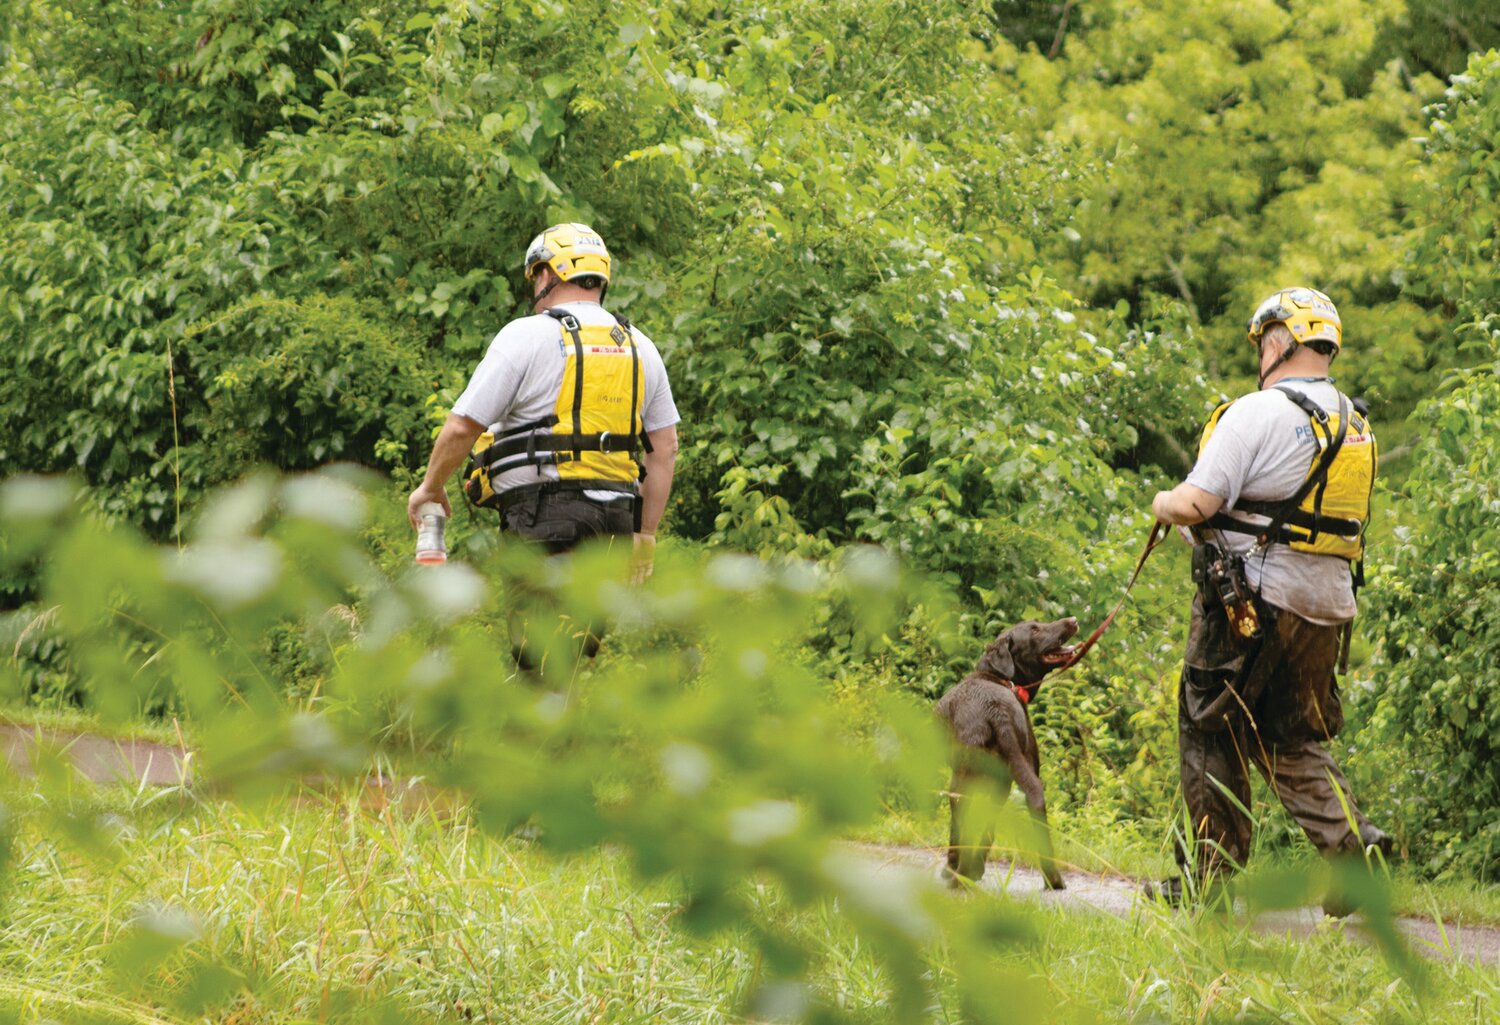 Two first responders, along with their search and rescue dog, search along the canal Sunday. Five people were confirmed dead in the Upper Makefield flash flood, but two children were still missing at press time.